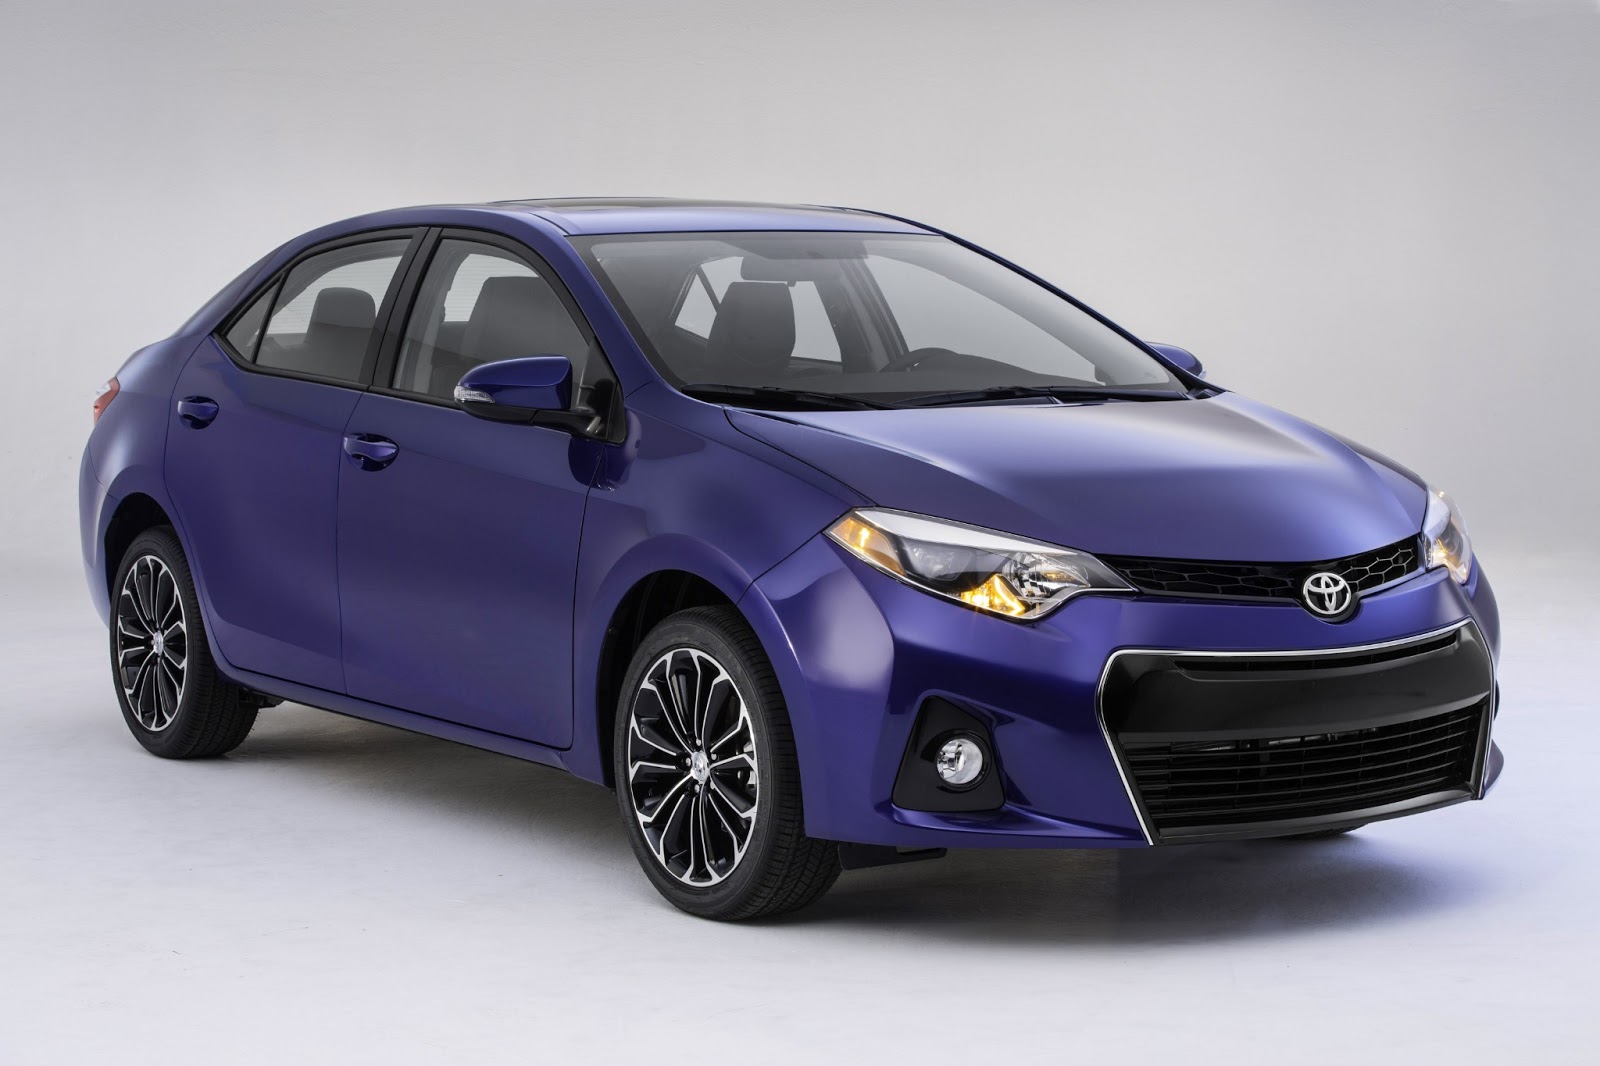 ASIAN AUTO DIGEST: 2014 Toyota Corolla Launched In US